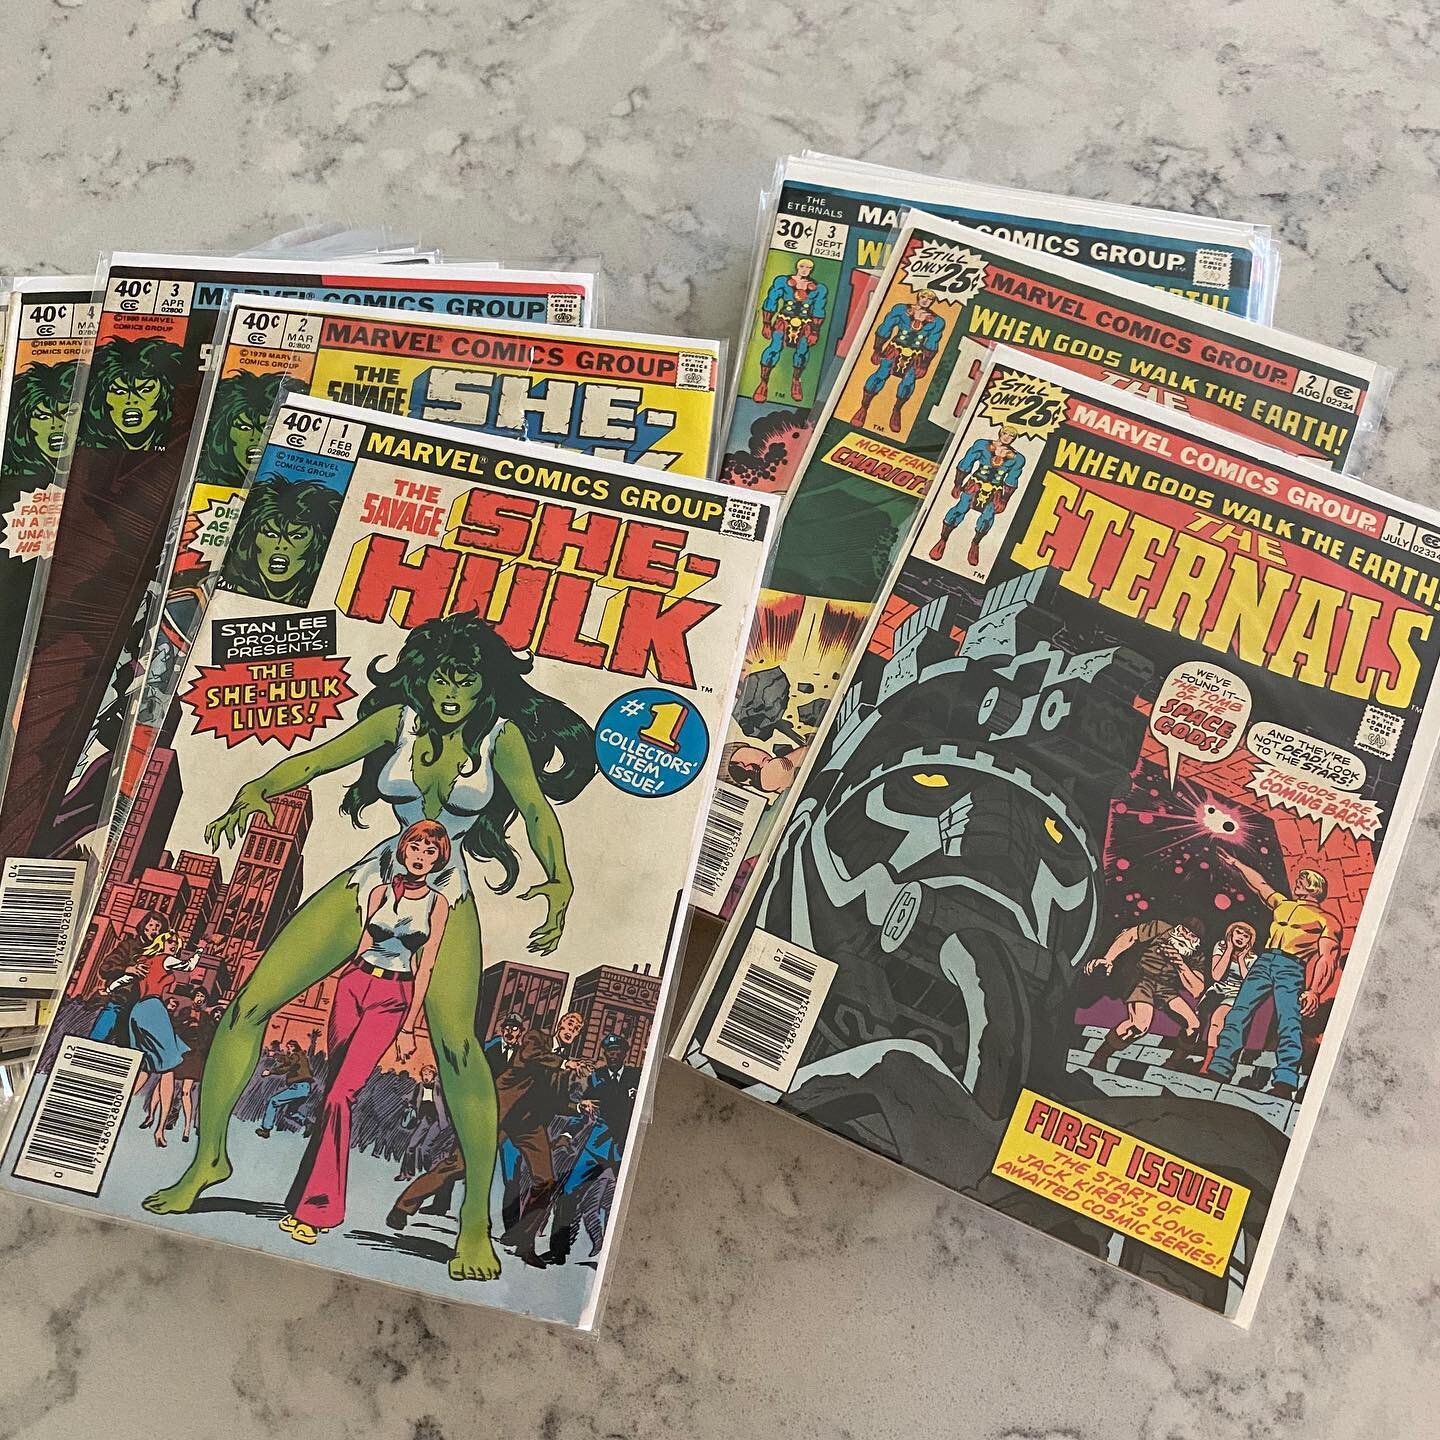 Mail call! Thanks to @daywalker1969 for these beauties! 😍 Nearly full runs of Savage She-Hulk and The Eternals! 
&mdash;&mdash;&mdash;&mdash;&mdash;&mdash;&mdash;&mdash;&mdash;&mdash;&mdash;&mdash;&mdash;&mdash;
#comics #comicbooks #shehulk #eternal